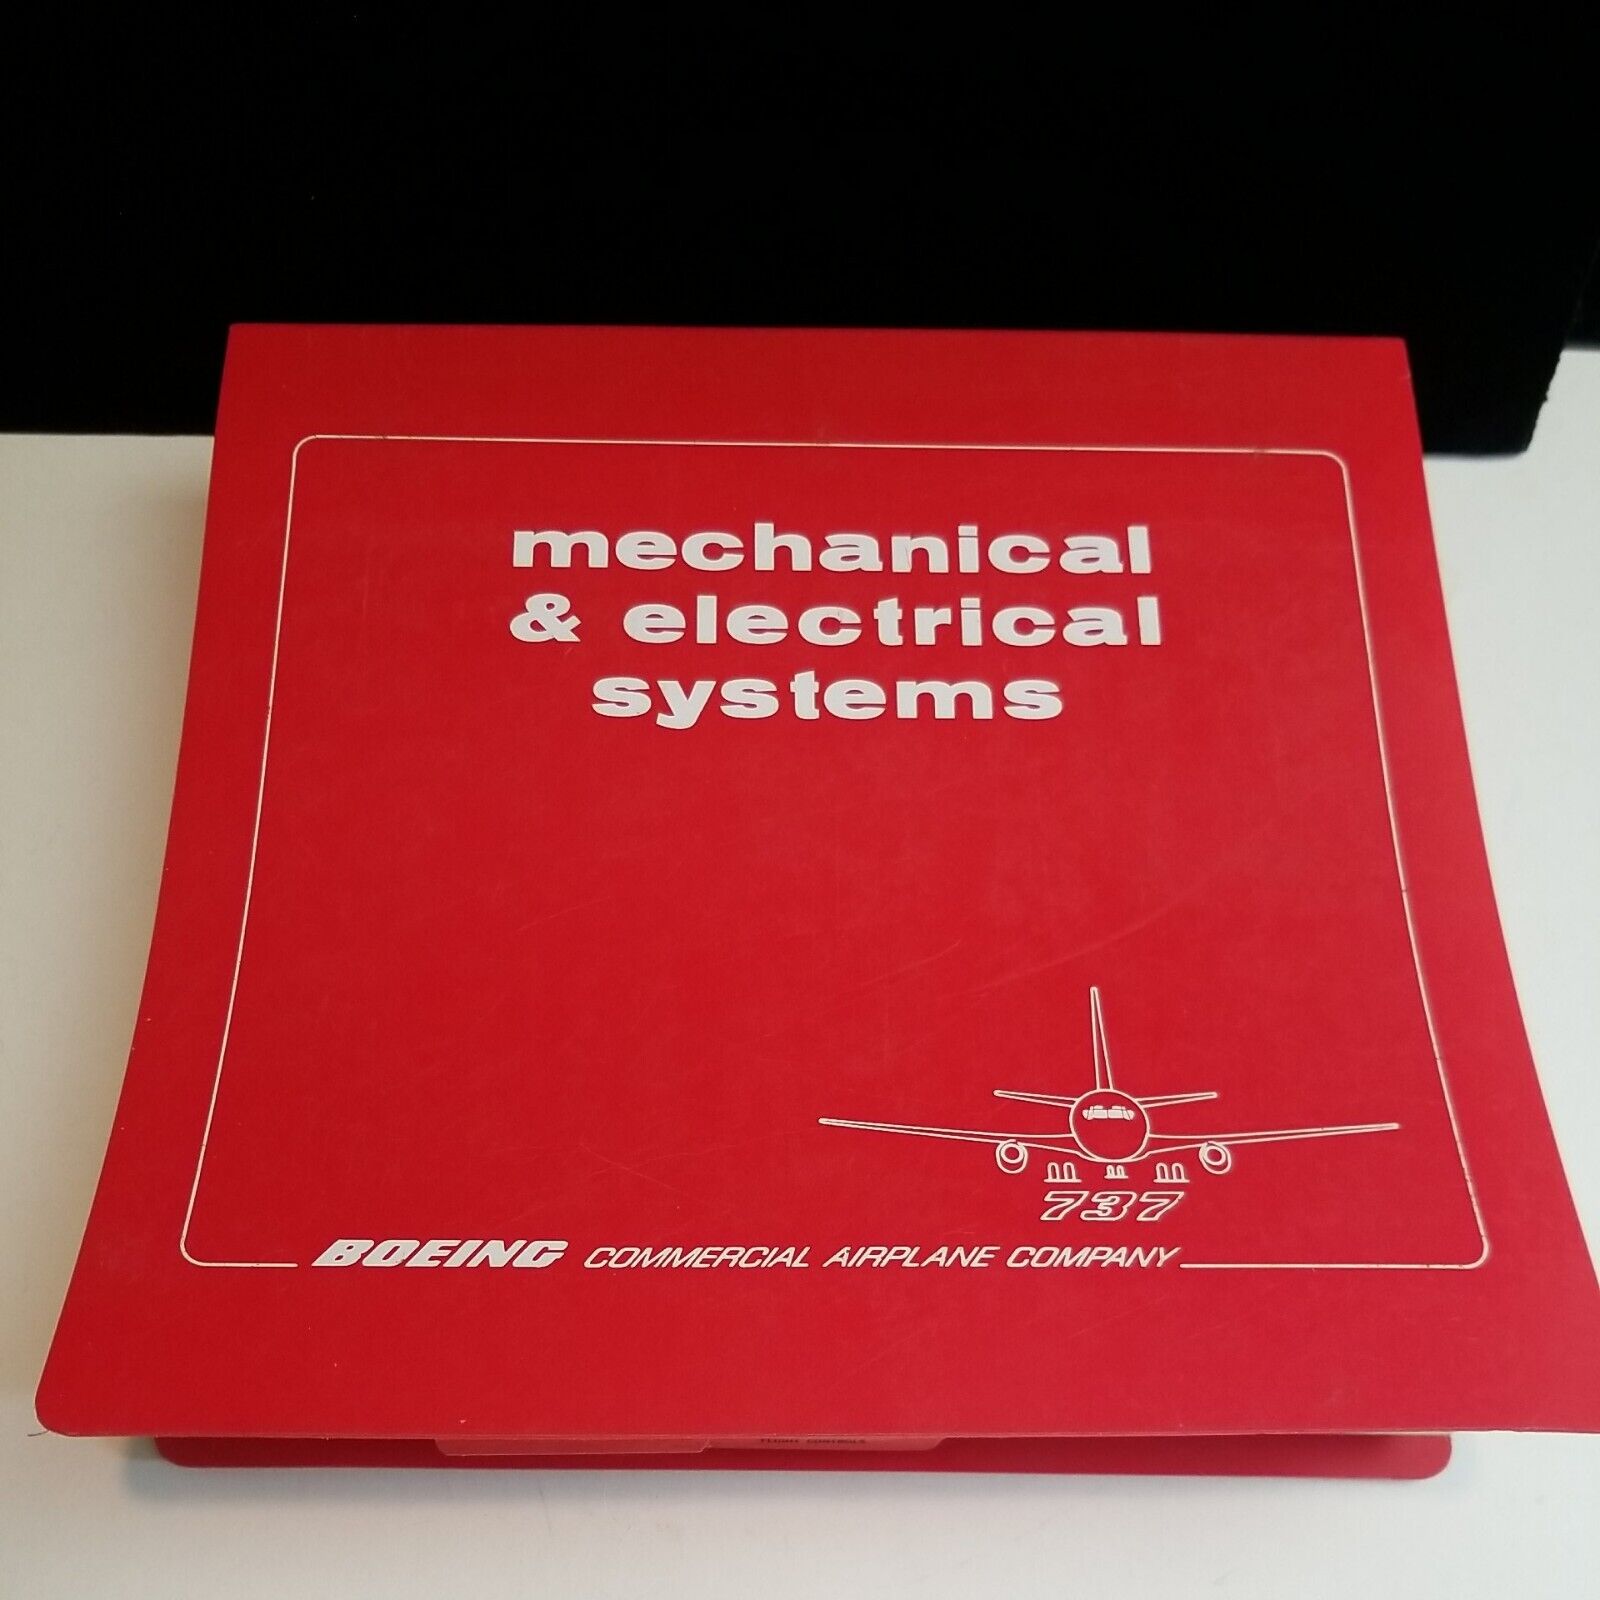 AIRCRAFT ELECTRICAL RARE Boeing 737  MAERSK DANISH AIRLINES MECHANICAL  Manual